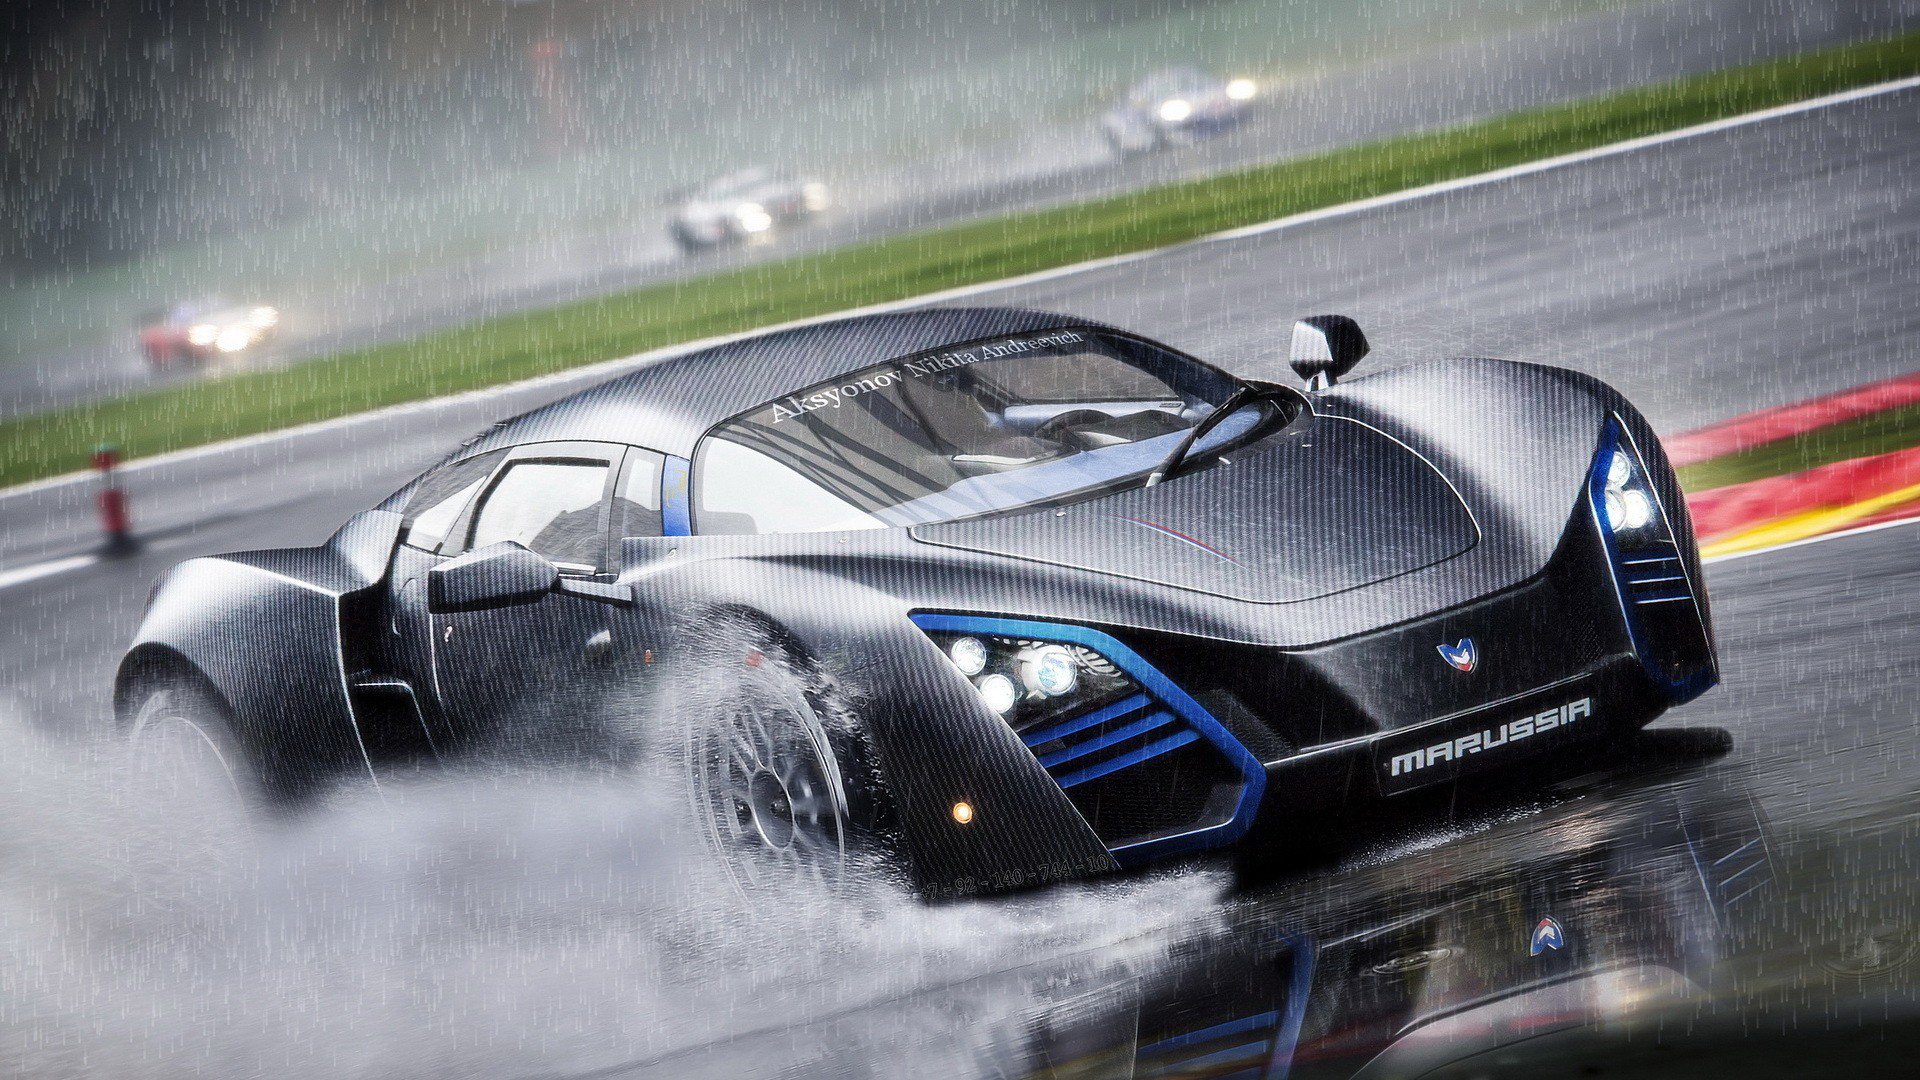 Marussia B2 Hd Wallpapers Background Images